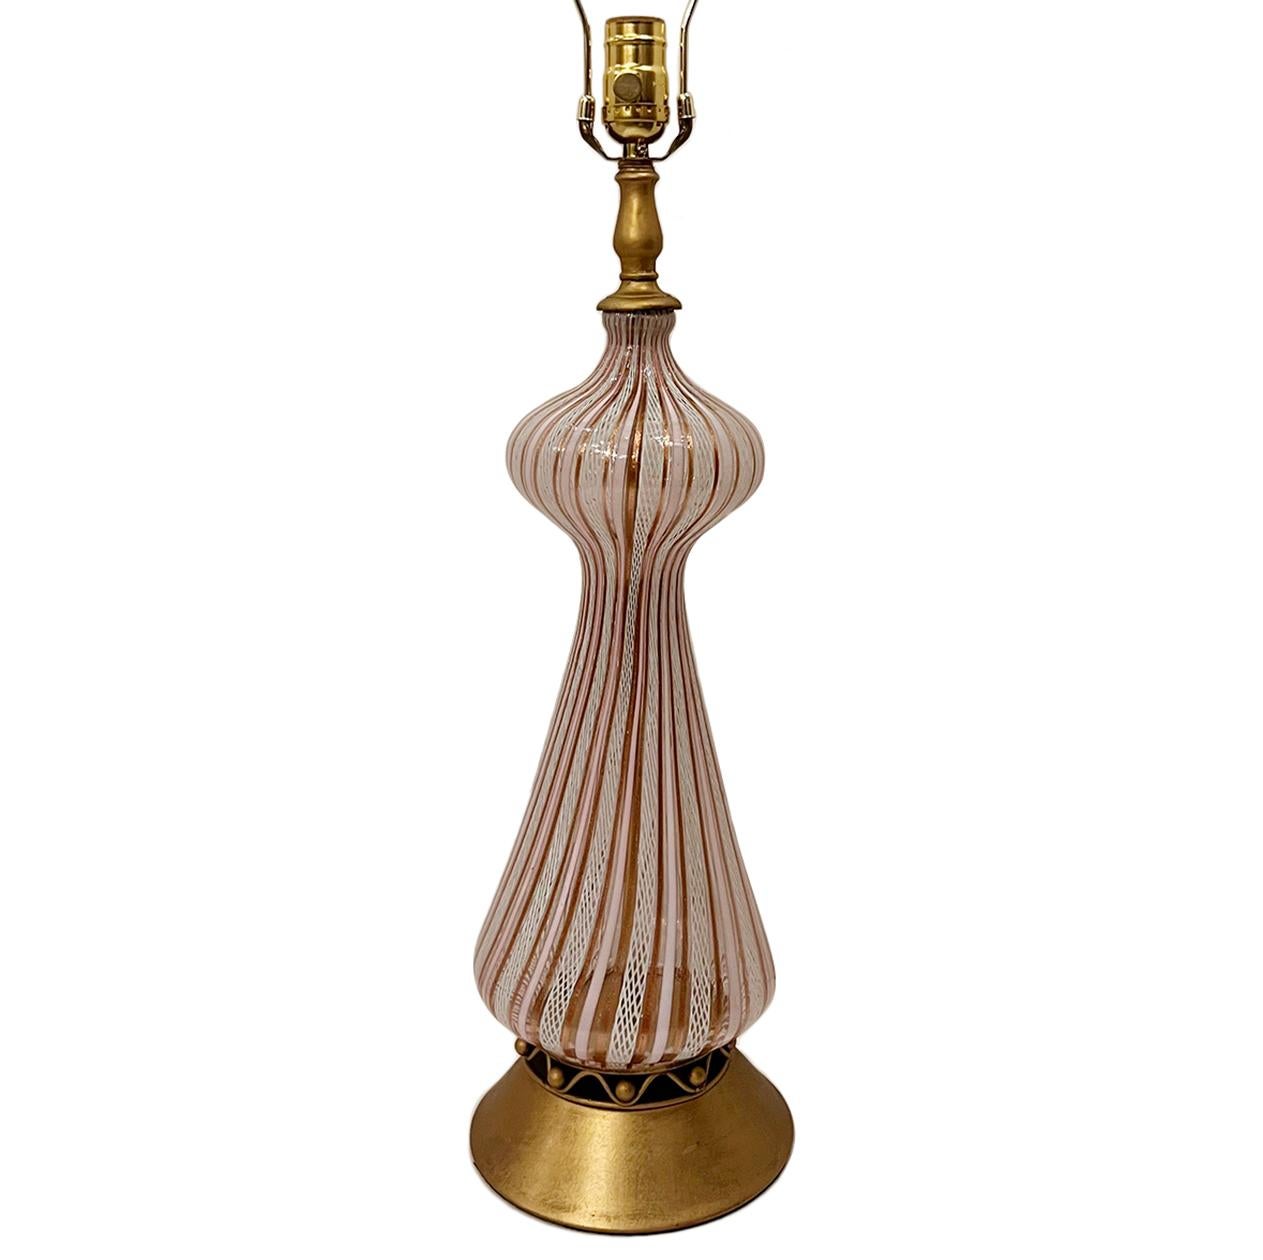 A single circa 1920's Italian blown glass table lamp with gilt base.

Measurements:
Height of body: 21